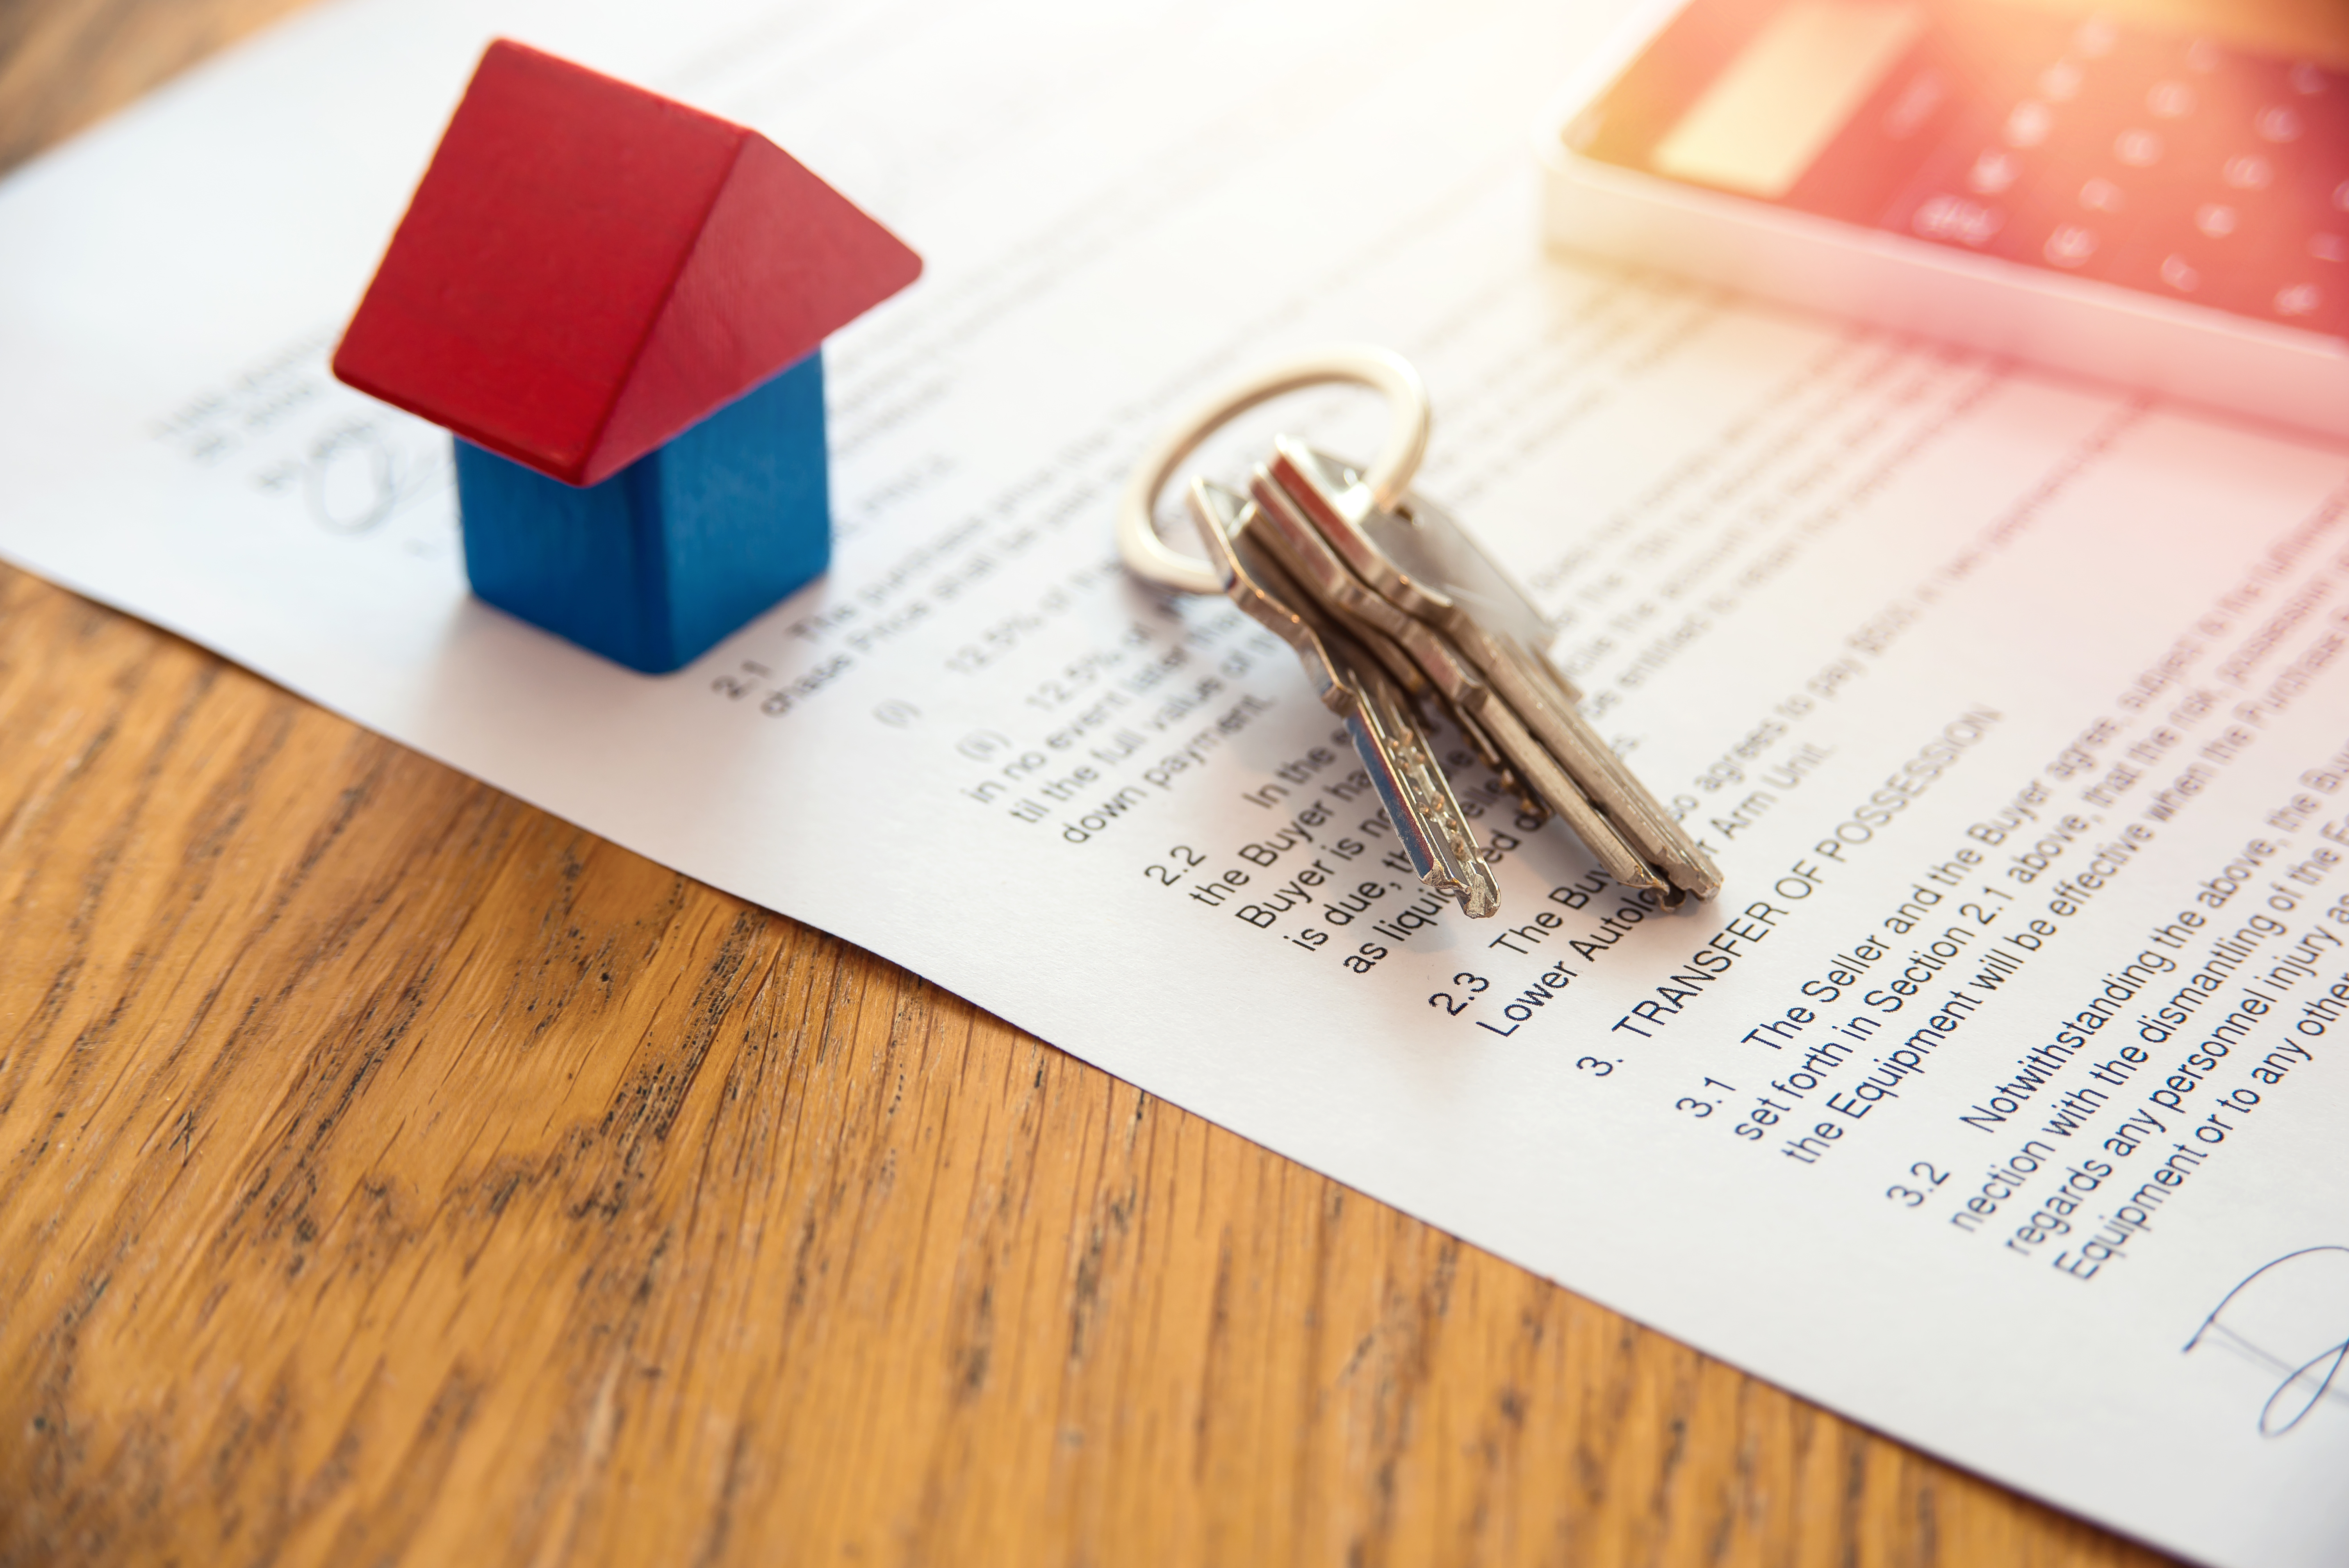 Photograph of a toy house and house keys lying on a home closing document.